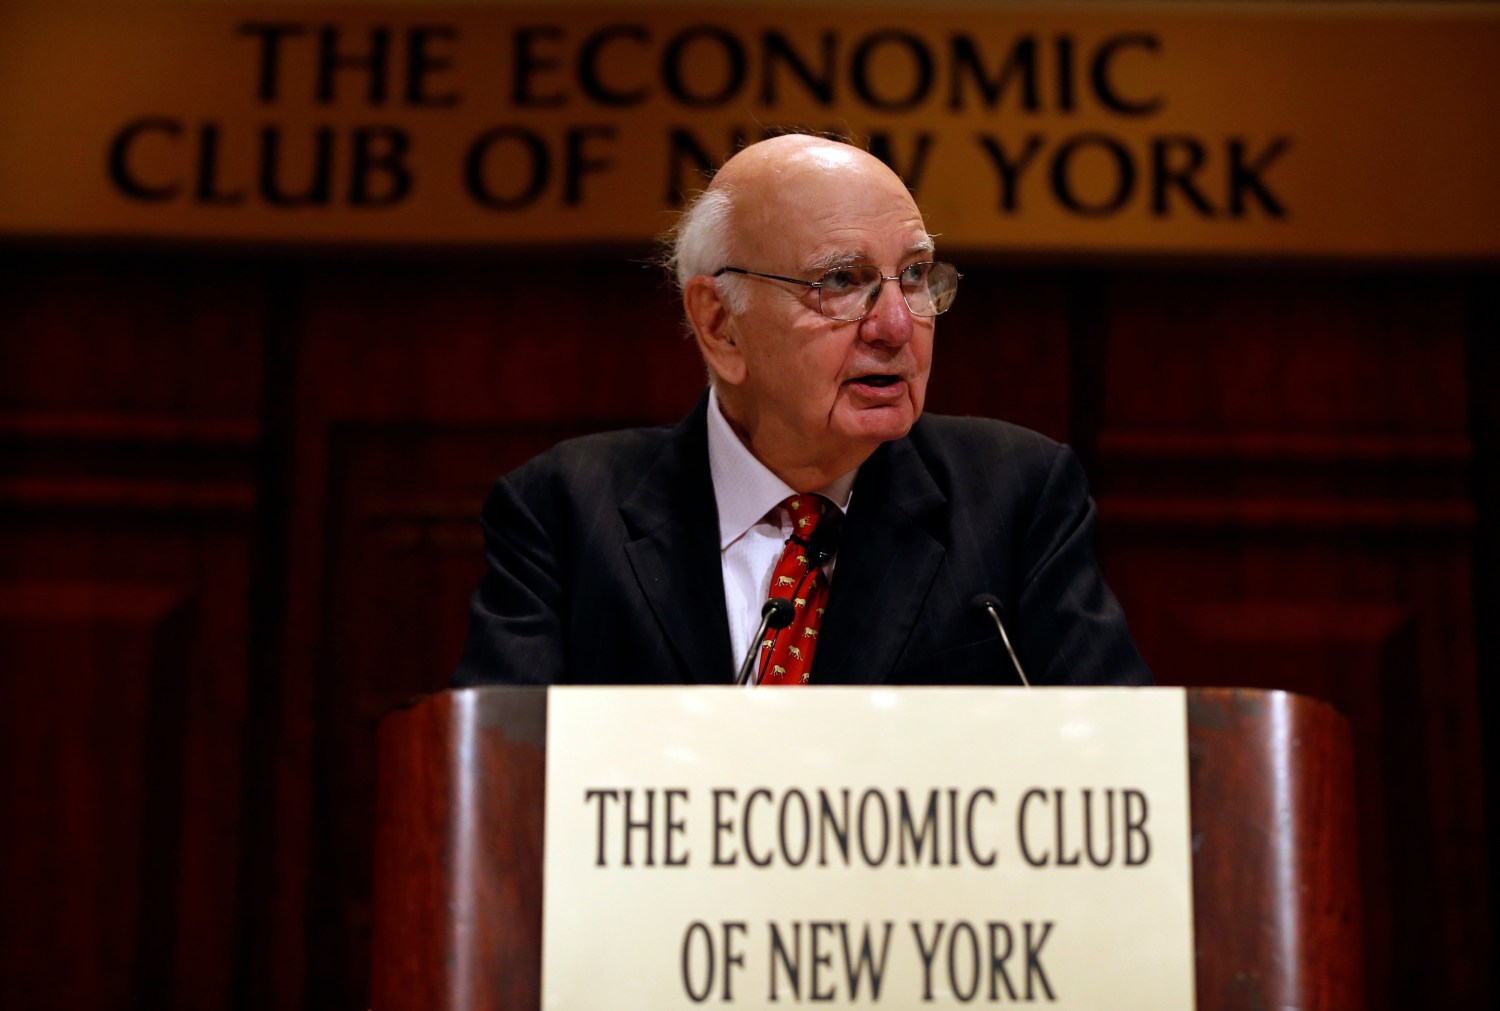 Former Chairman of the U.S. Federal Reserve Paul Volcker addresses the Economic Club of New York May 29, 2013. REUTERS/Mike Segar (UNITED STATES - Tags: BUSINESS)